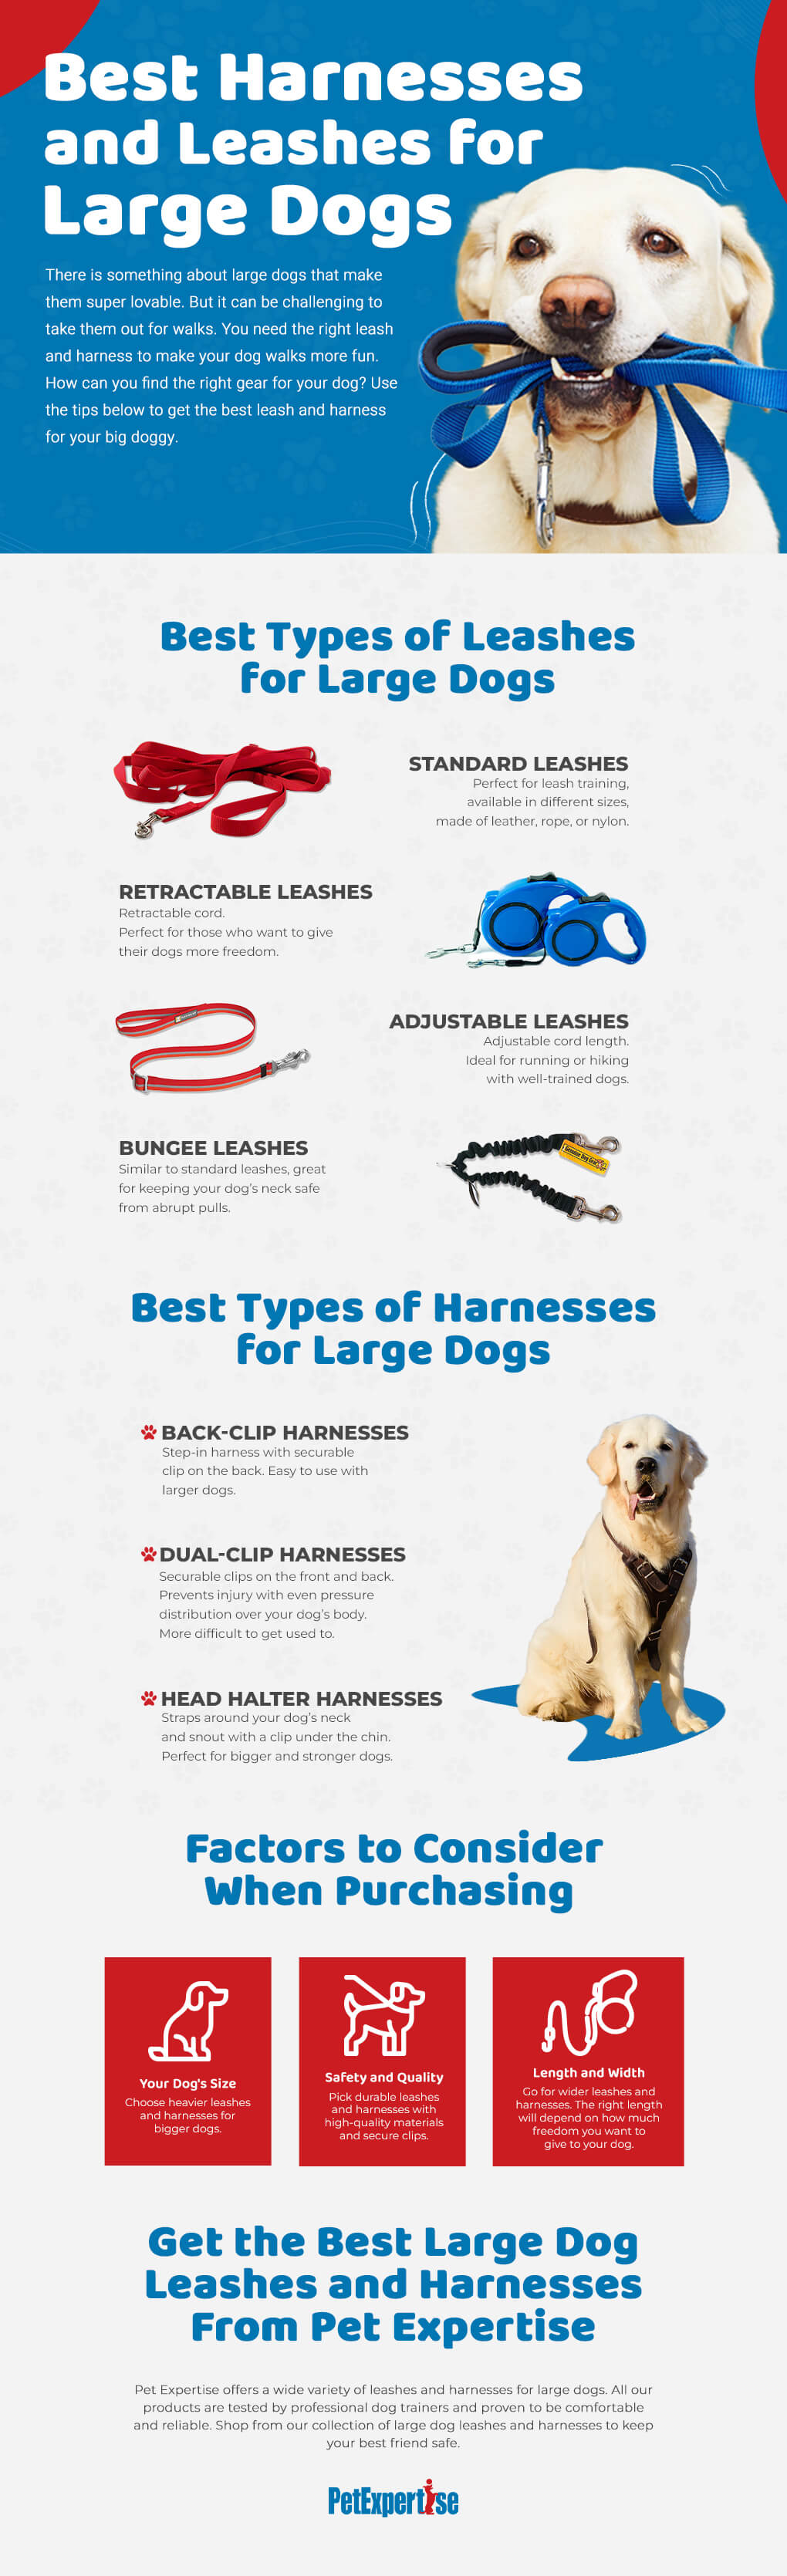 Best Large Dog Harnesses and Leashes Infographic